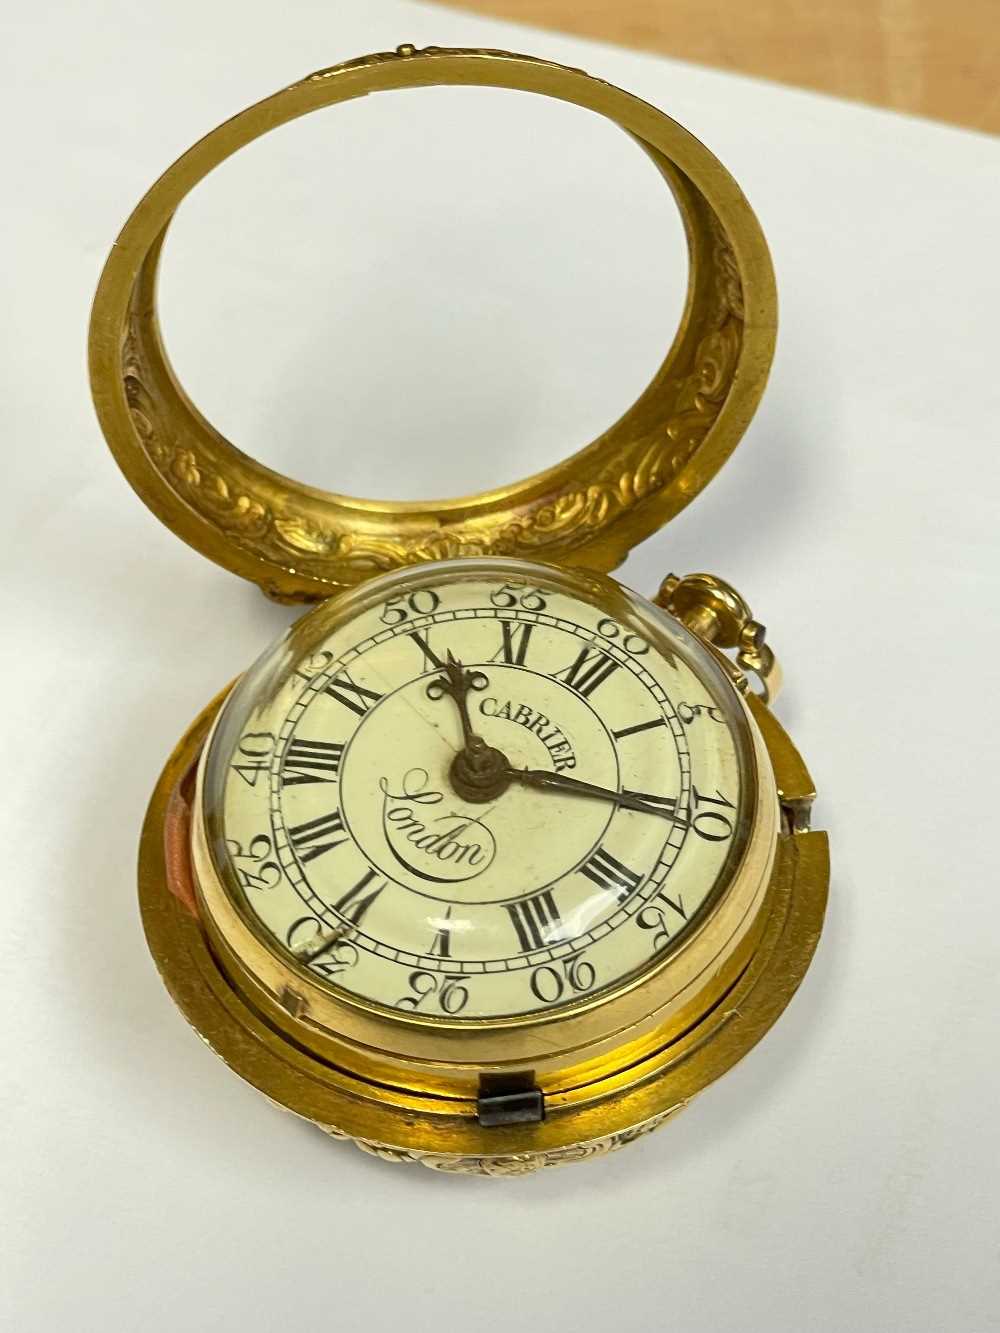 MID-18TH C. GOLD PAIR CASED POCKET WATCH, Charles Cabrier, London 1750, with white enamel dial, - Image 4 of 12